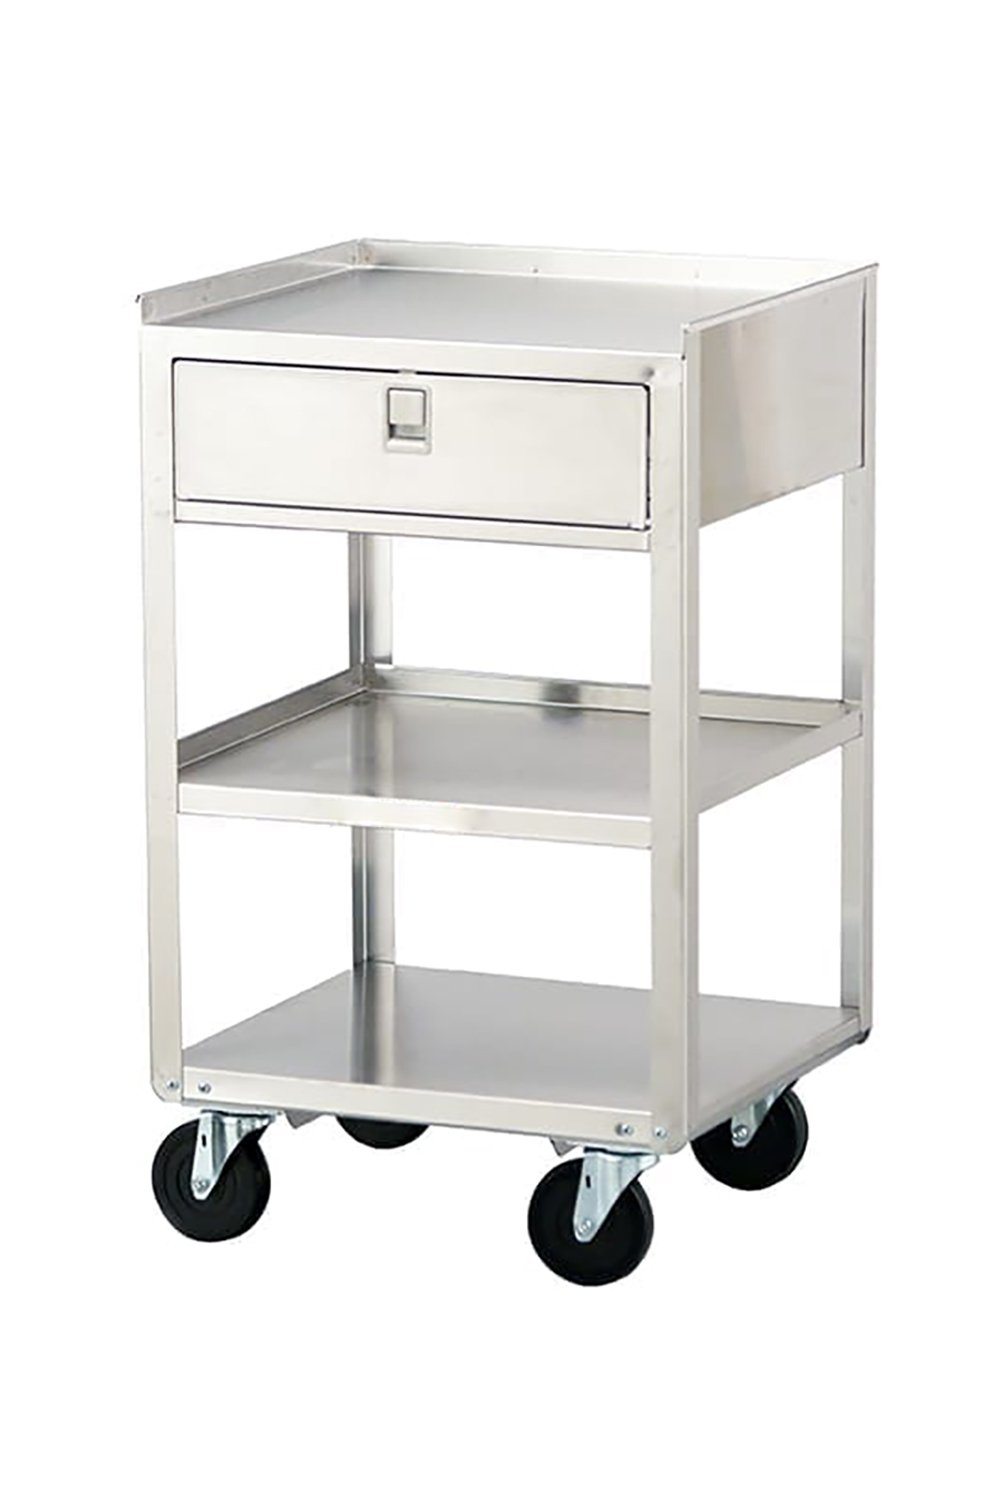 Stainless Steel Equipment/Utility Stand Stainless Solutions Lakeside 18-3/4"D x 16-3/4"W x 31"h One drawer, three shelves 500.0